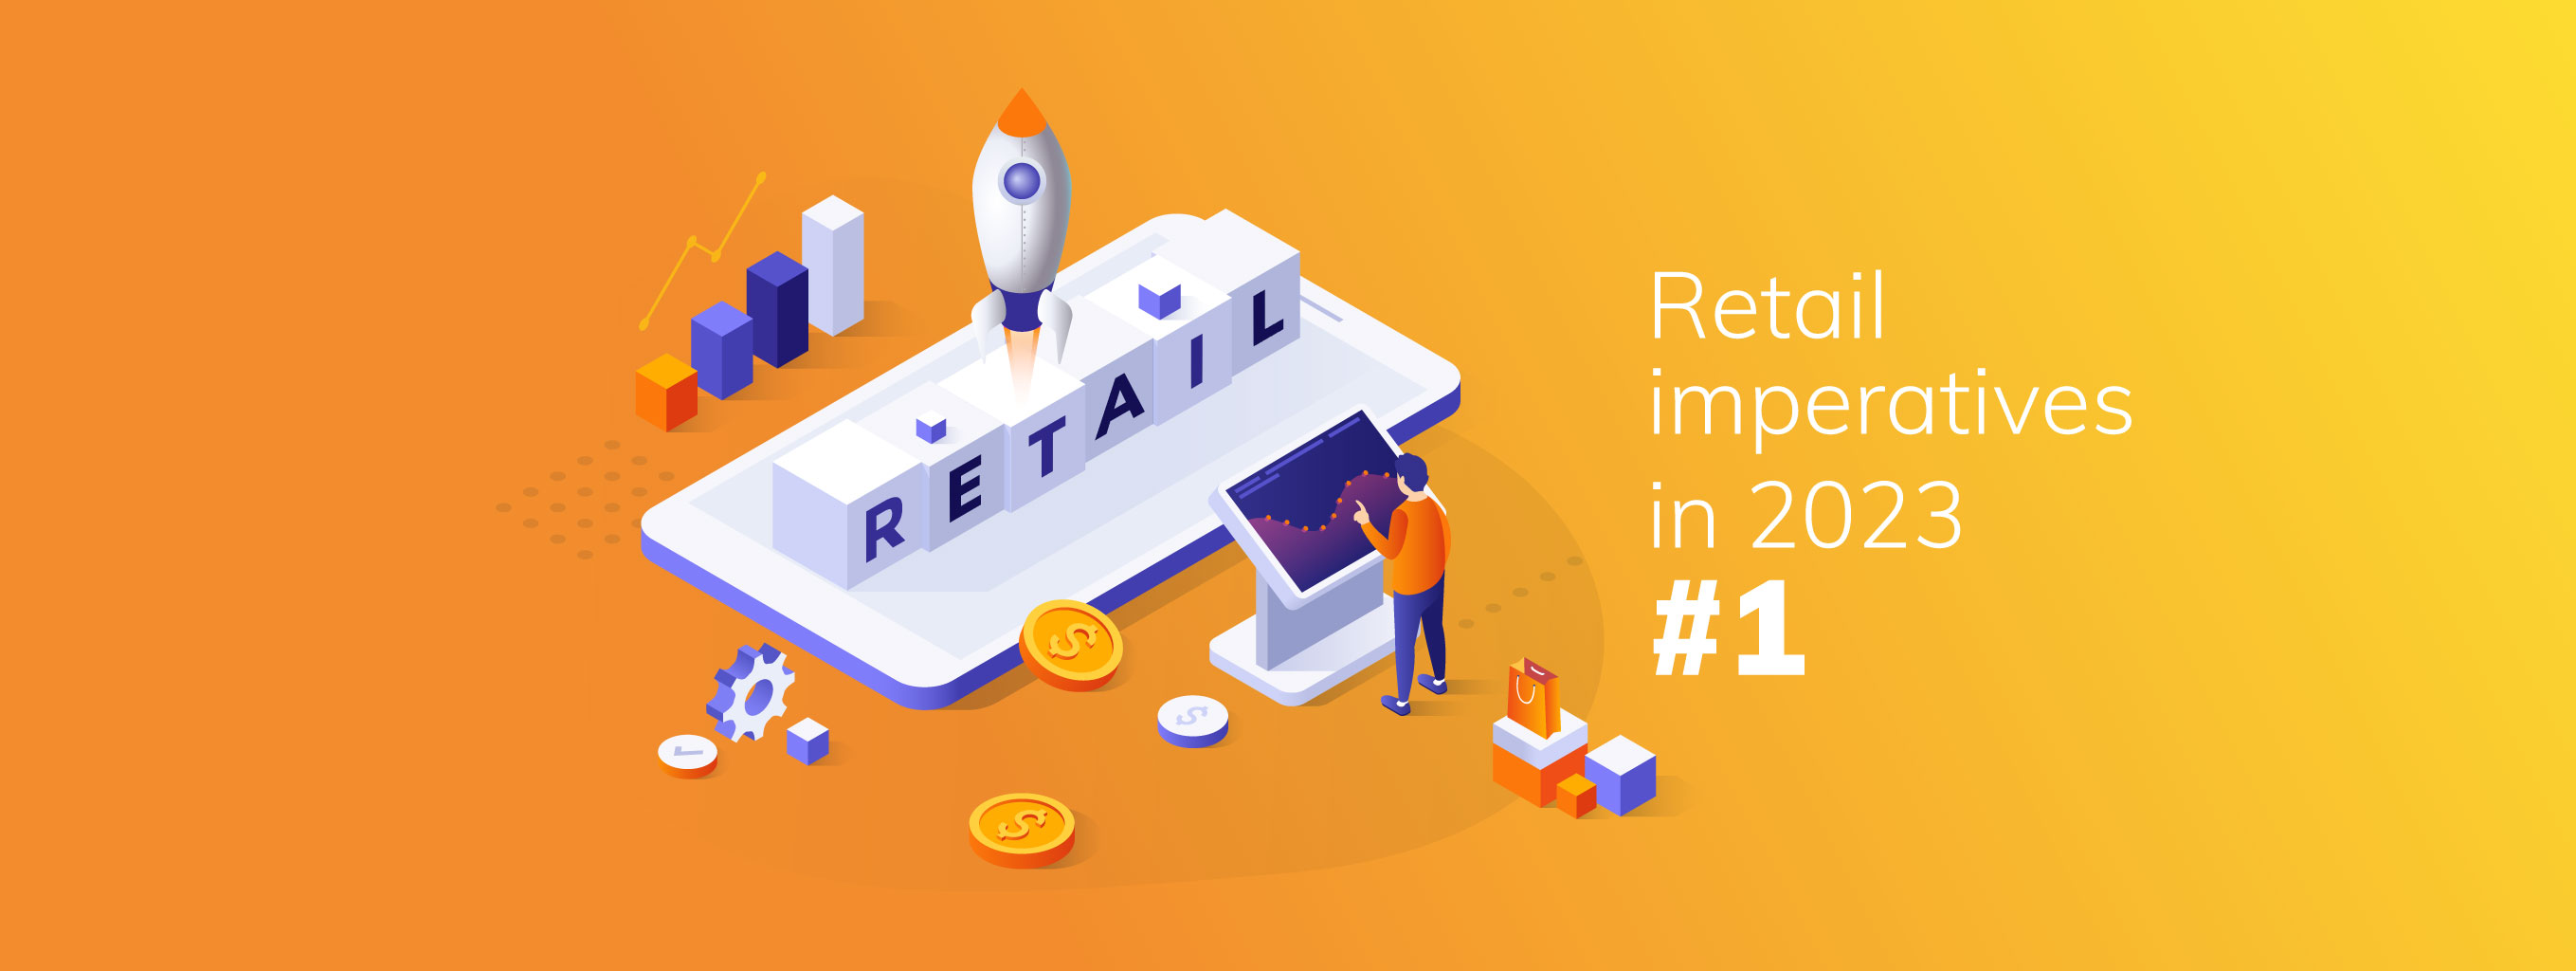 Retail imperatives in 2023 #1: Resetting profitability